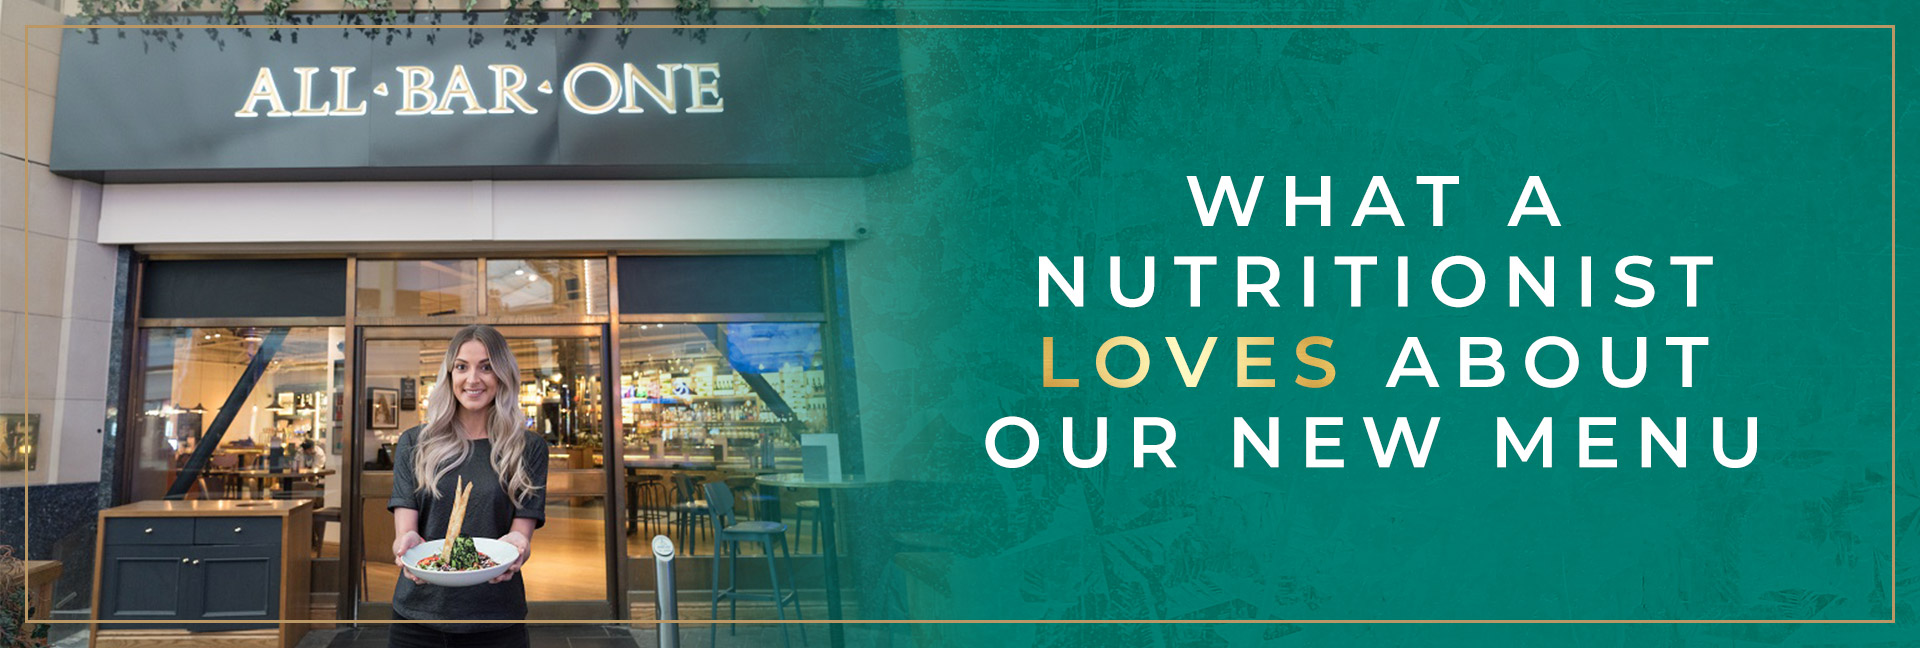 What a nutritionist loves about our new menu